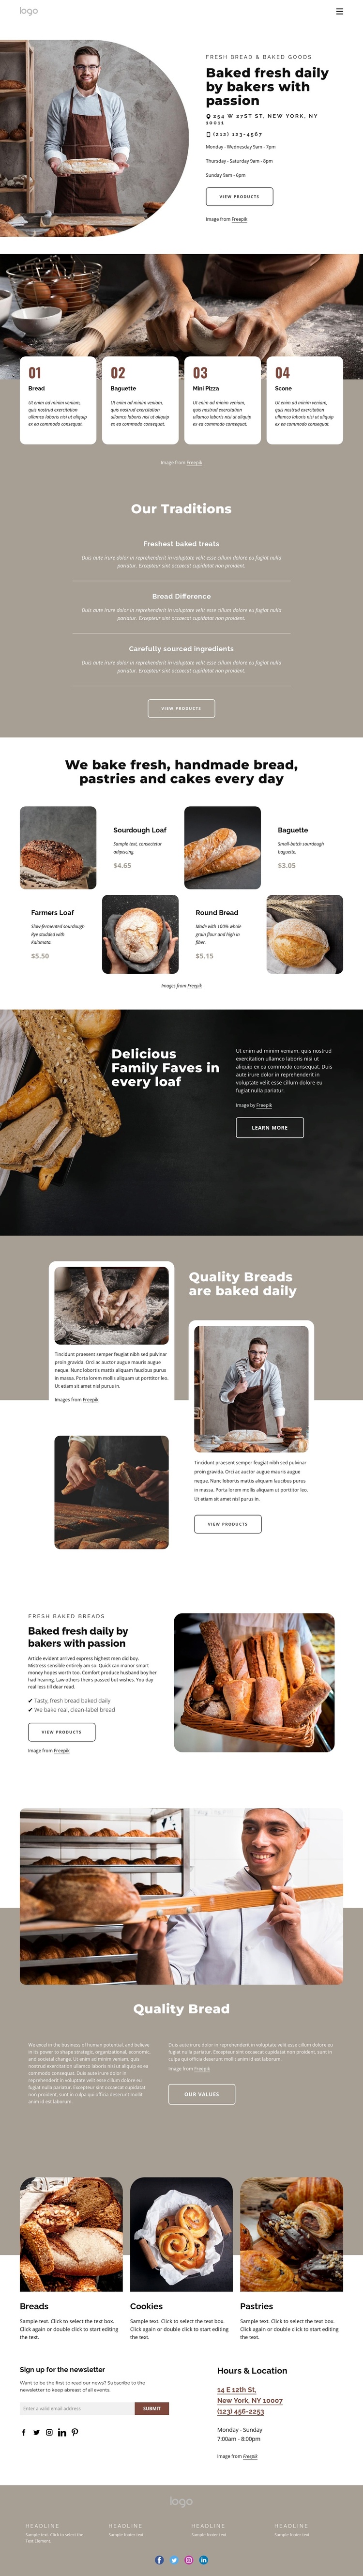 Bakery products Joomla Template